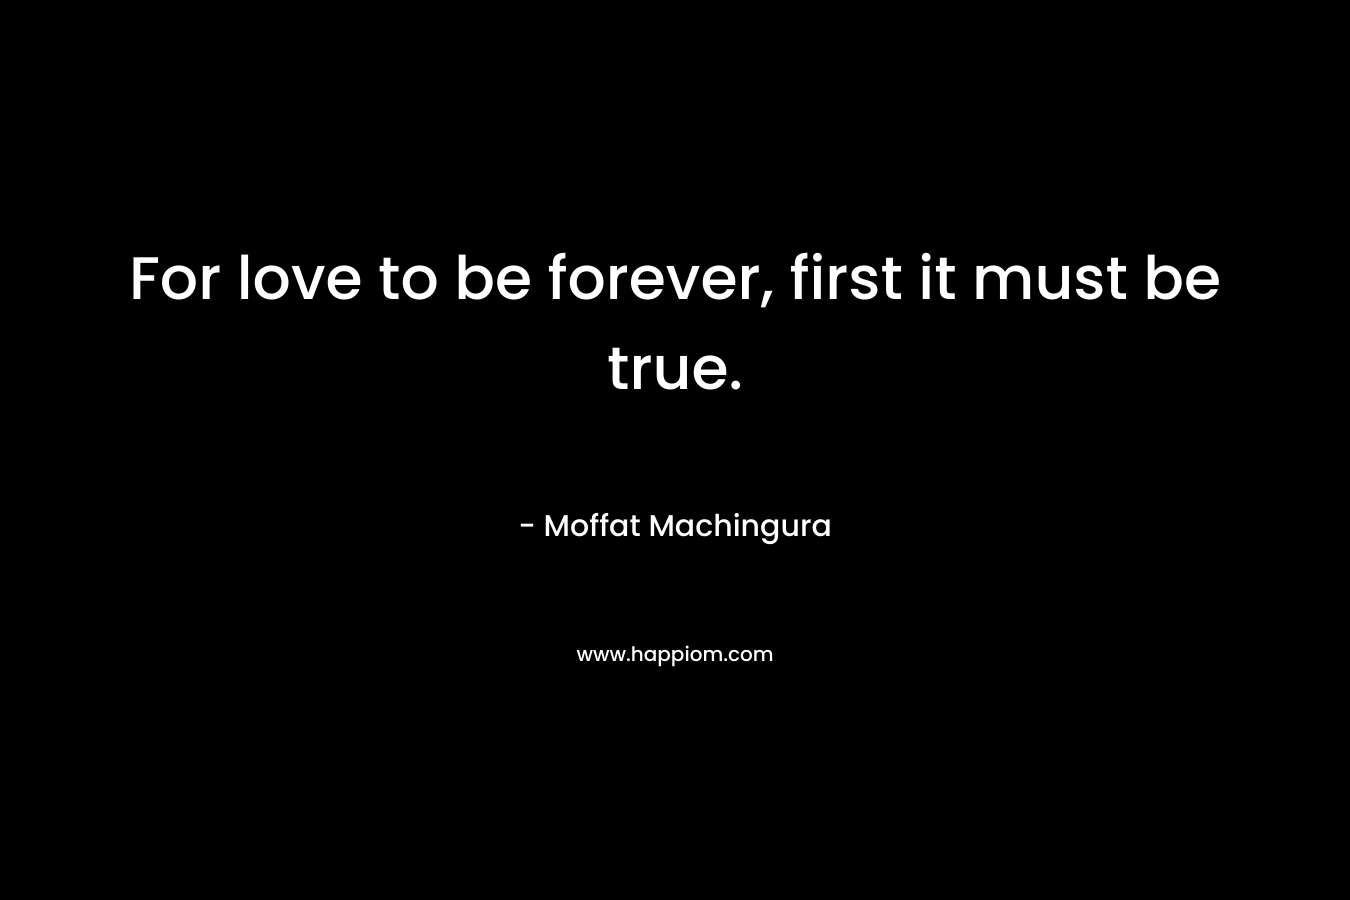 For love to be forever, first it must be true.